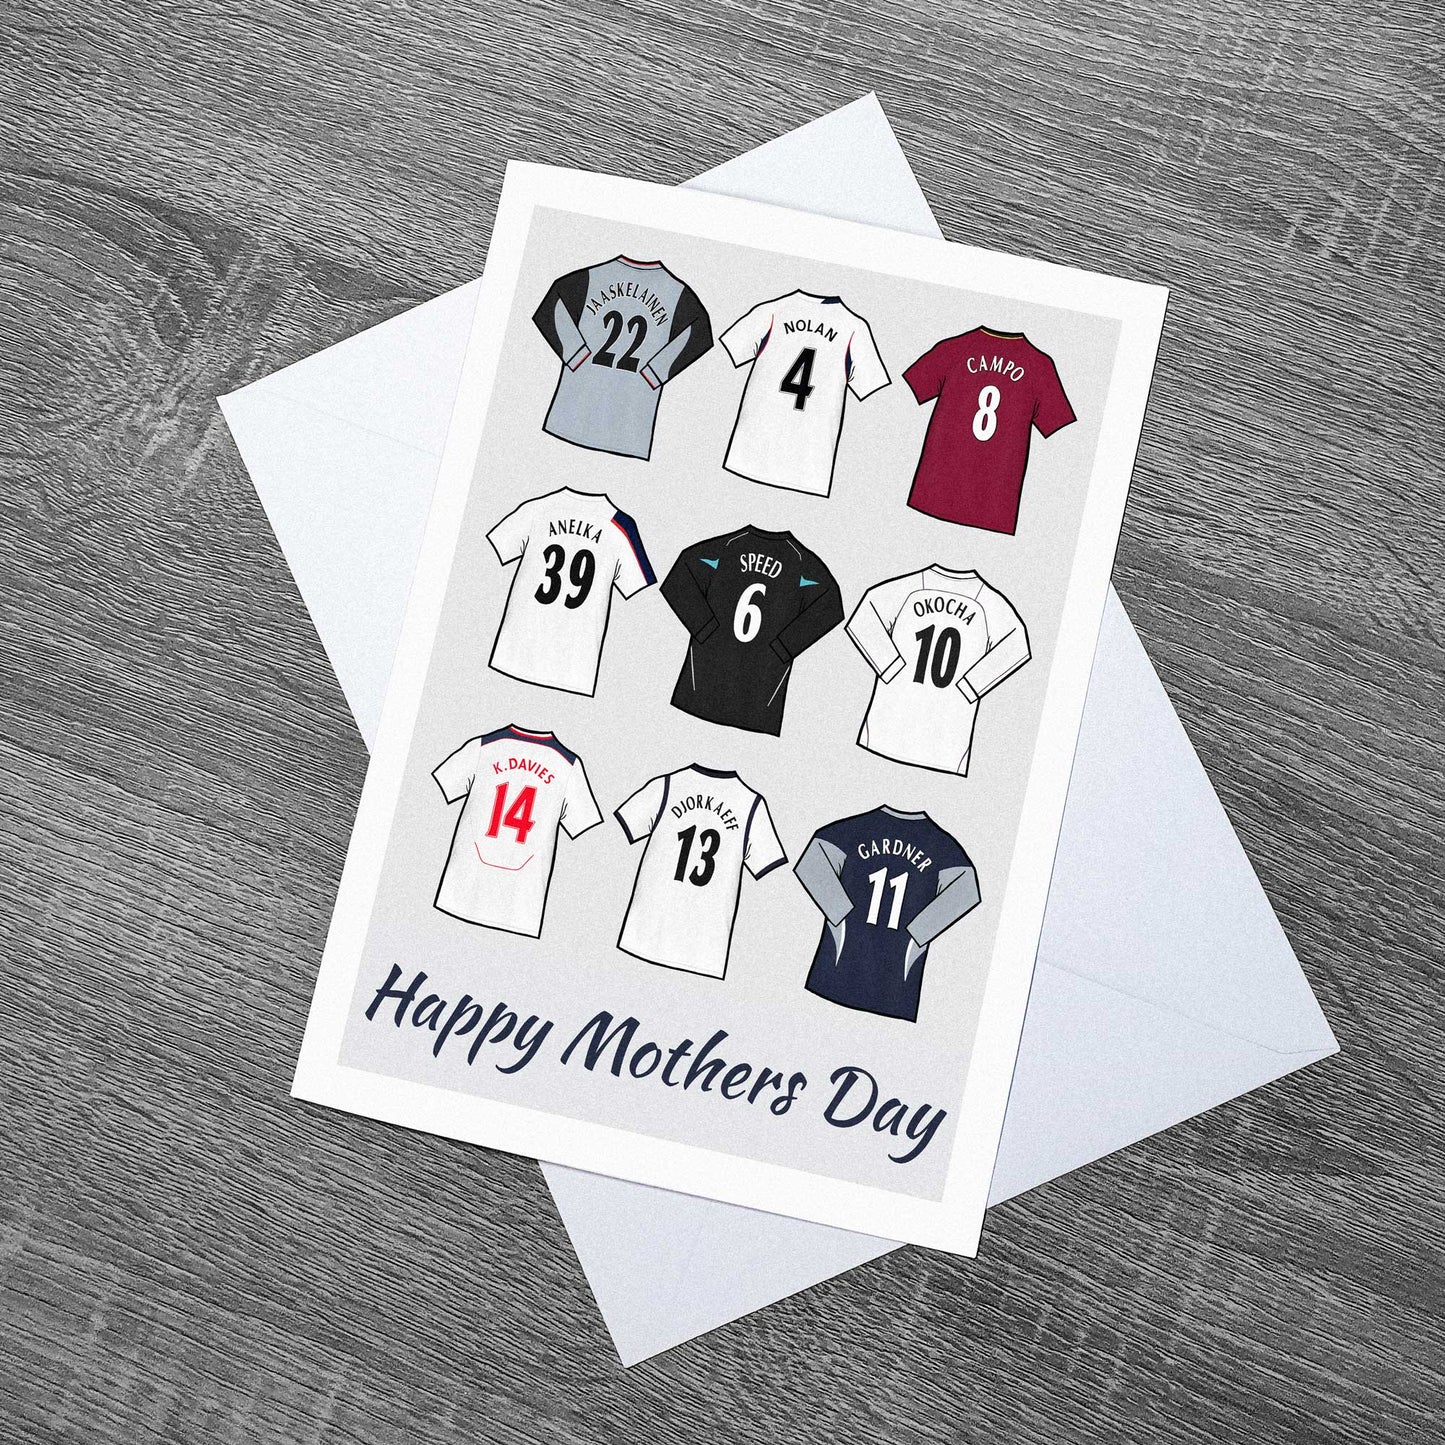 Mothers Day Bolton Wanderers themed featuring some of the greatest player jerseys in their history! 